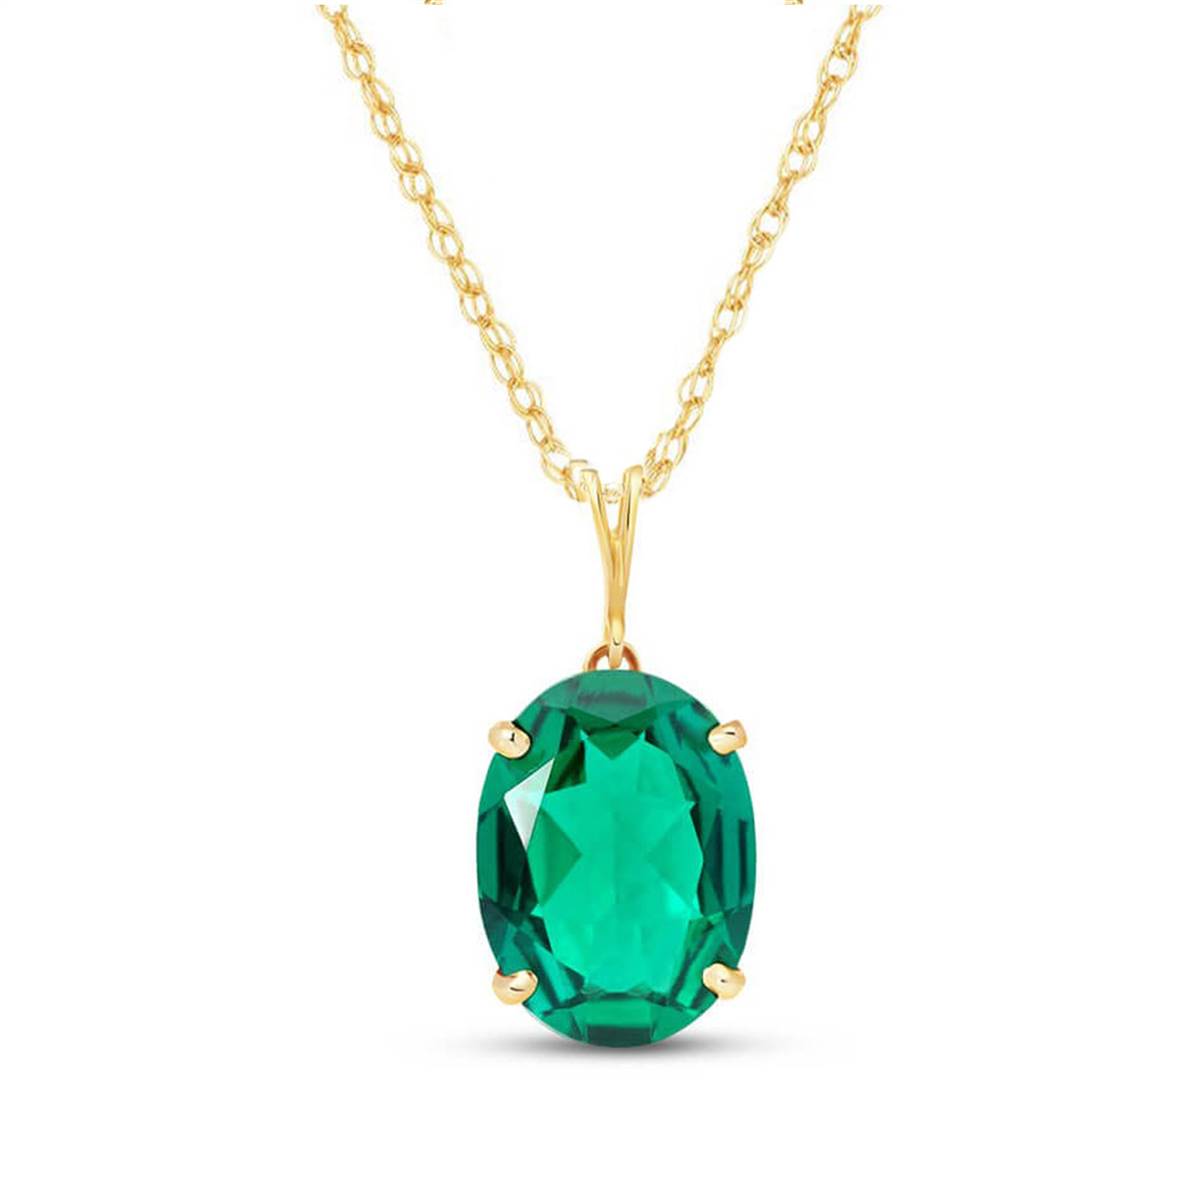 14K Solid Yellow Gold Necklace With Oval Shape 4.5 ctw High Polished Genuine Emerald - Grade AAA